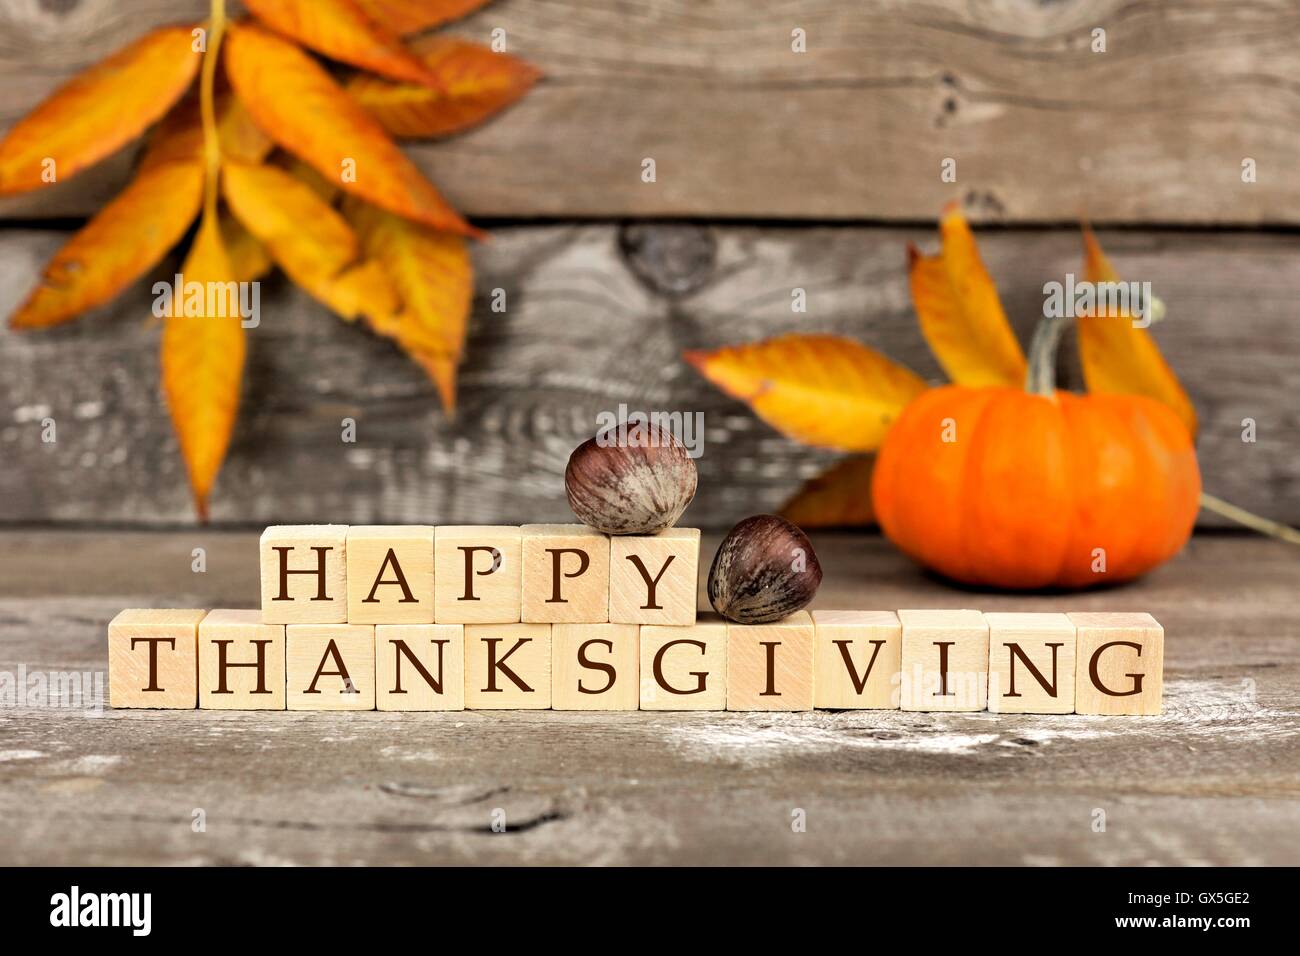 Happy Thanksgiving wooden blocks against a rustic wood background with pumpkins and autumn leaves Stock Photo